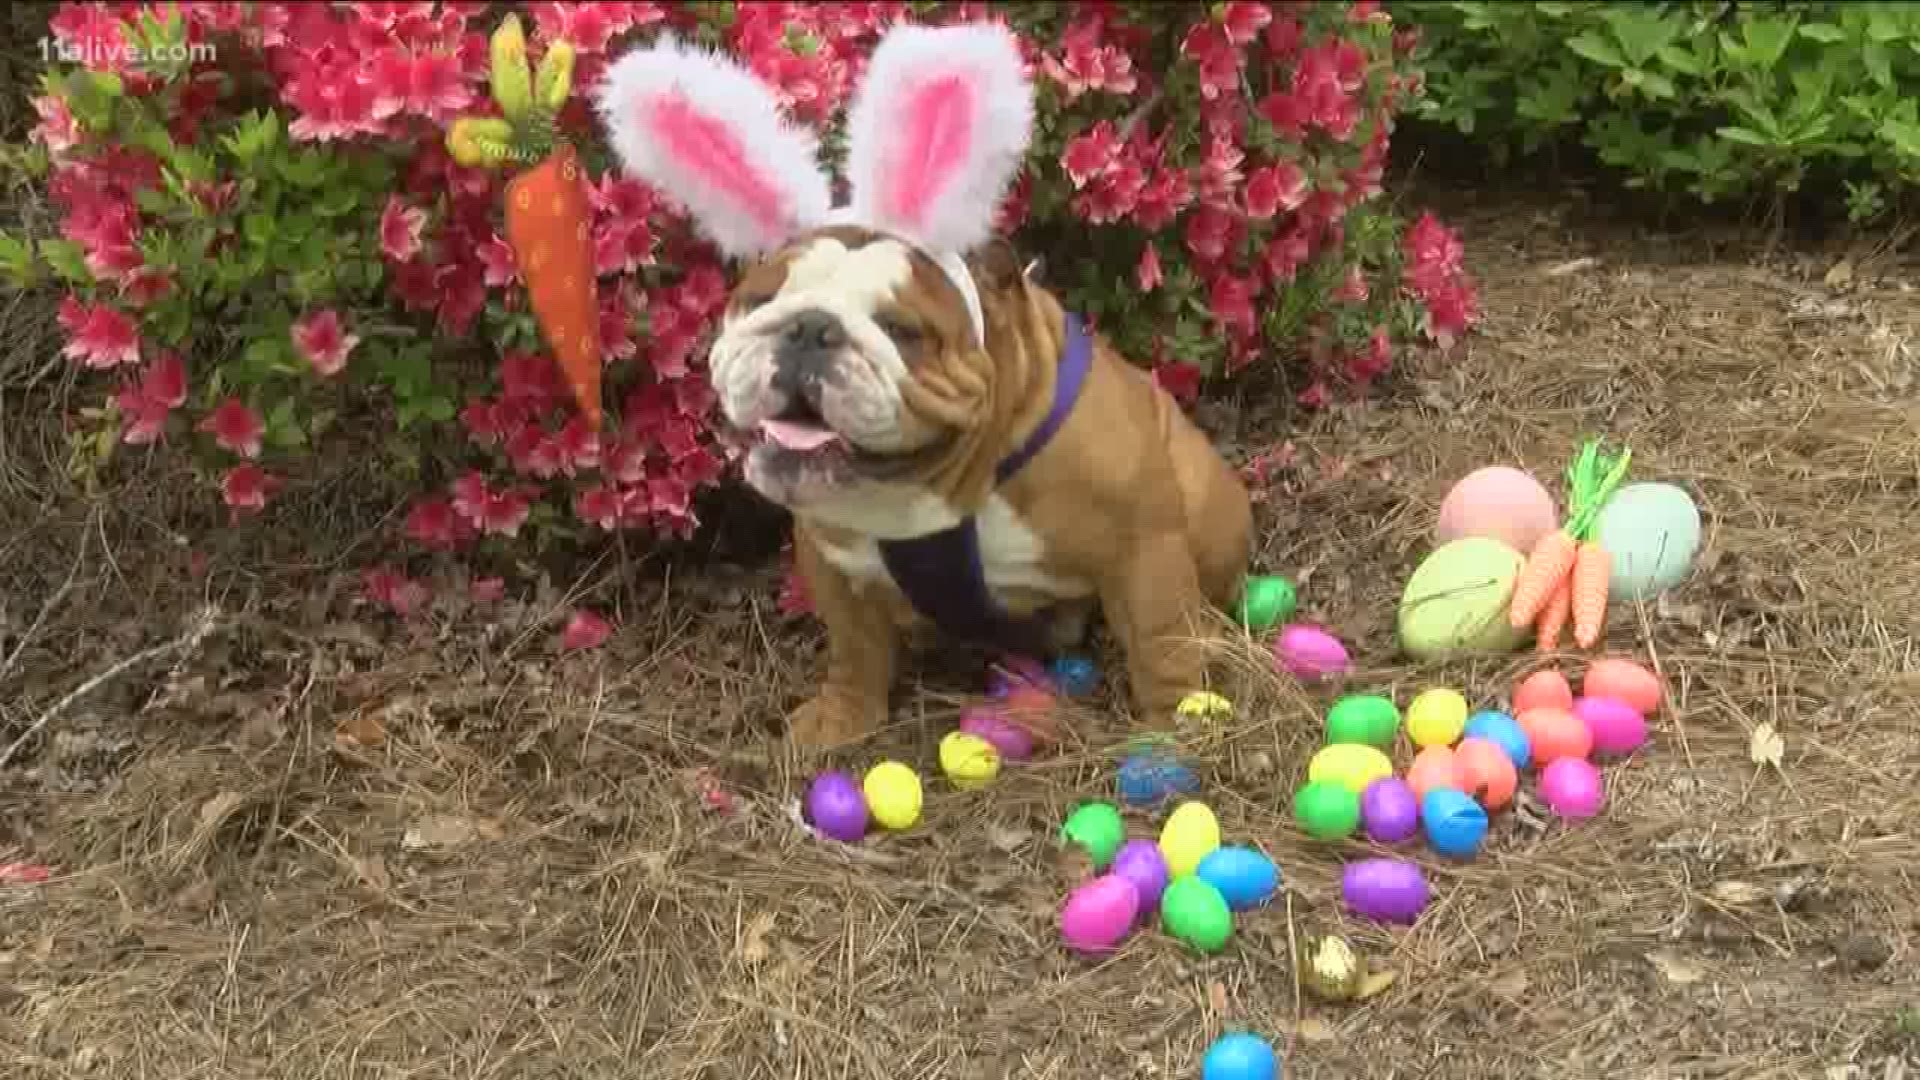 The English Bulldog from Eastern North Carolina won a contest to be the company's next Easter Bunny.